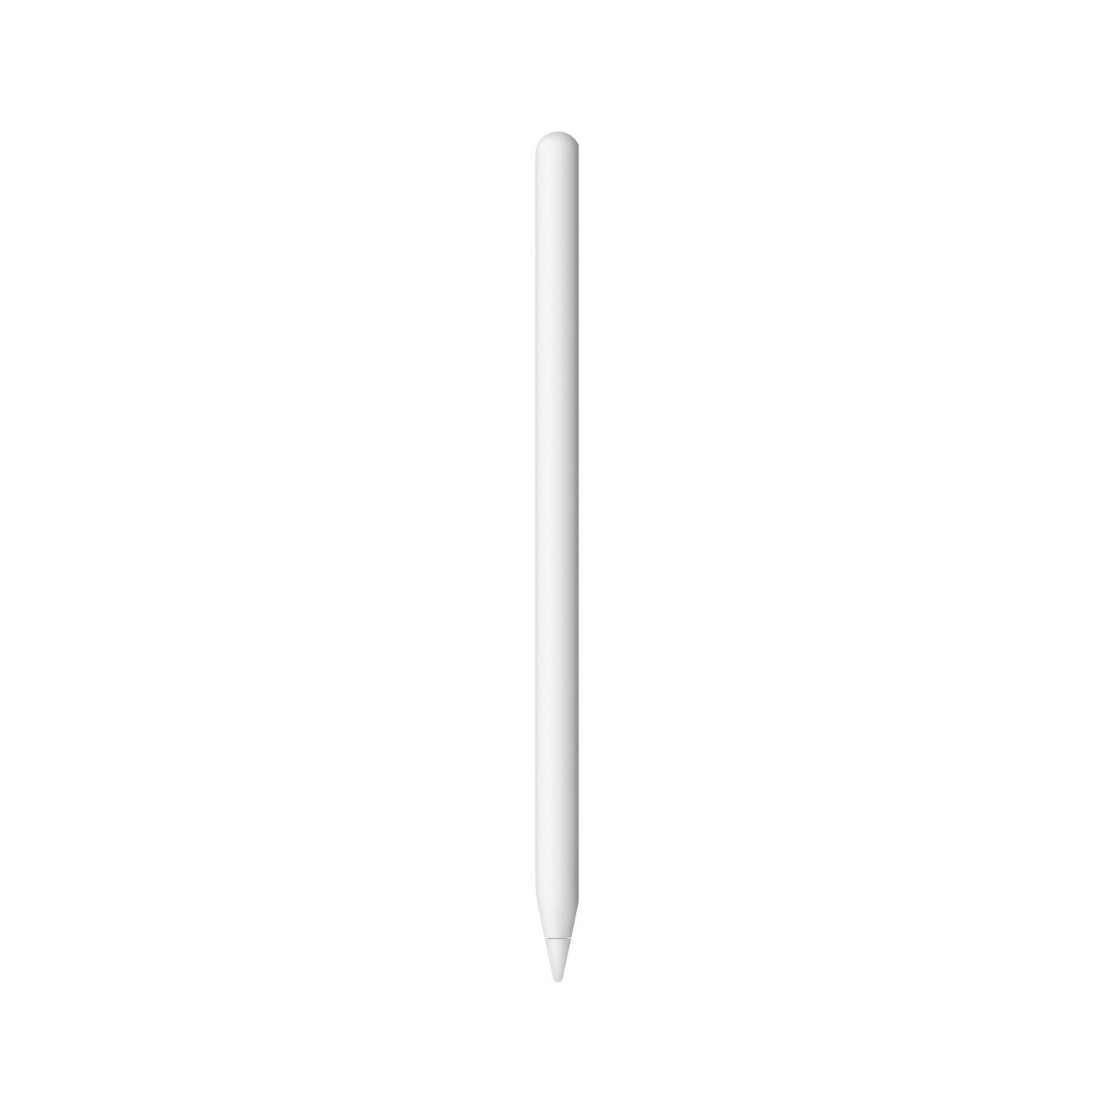 Apple Pencil 2nd Generation for Apple iPad Pro - QuickTech.in